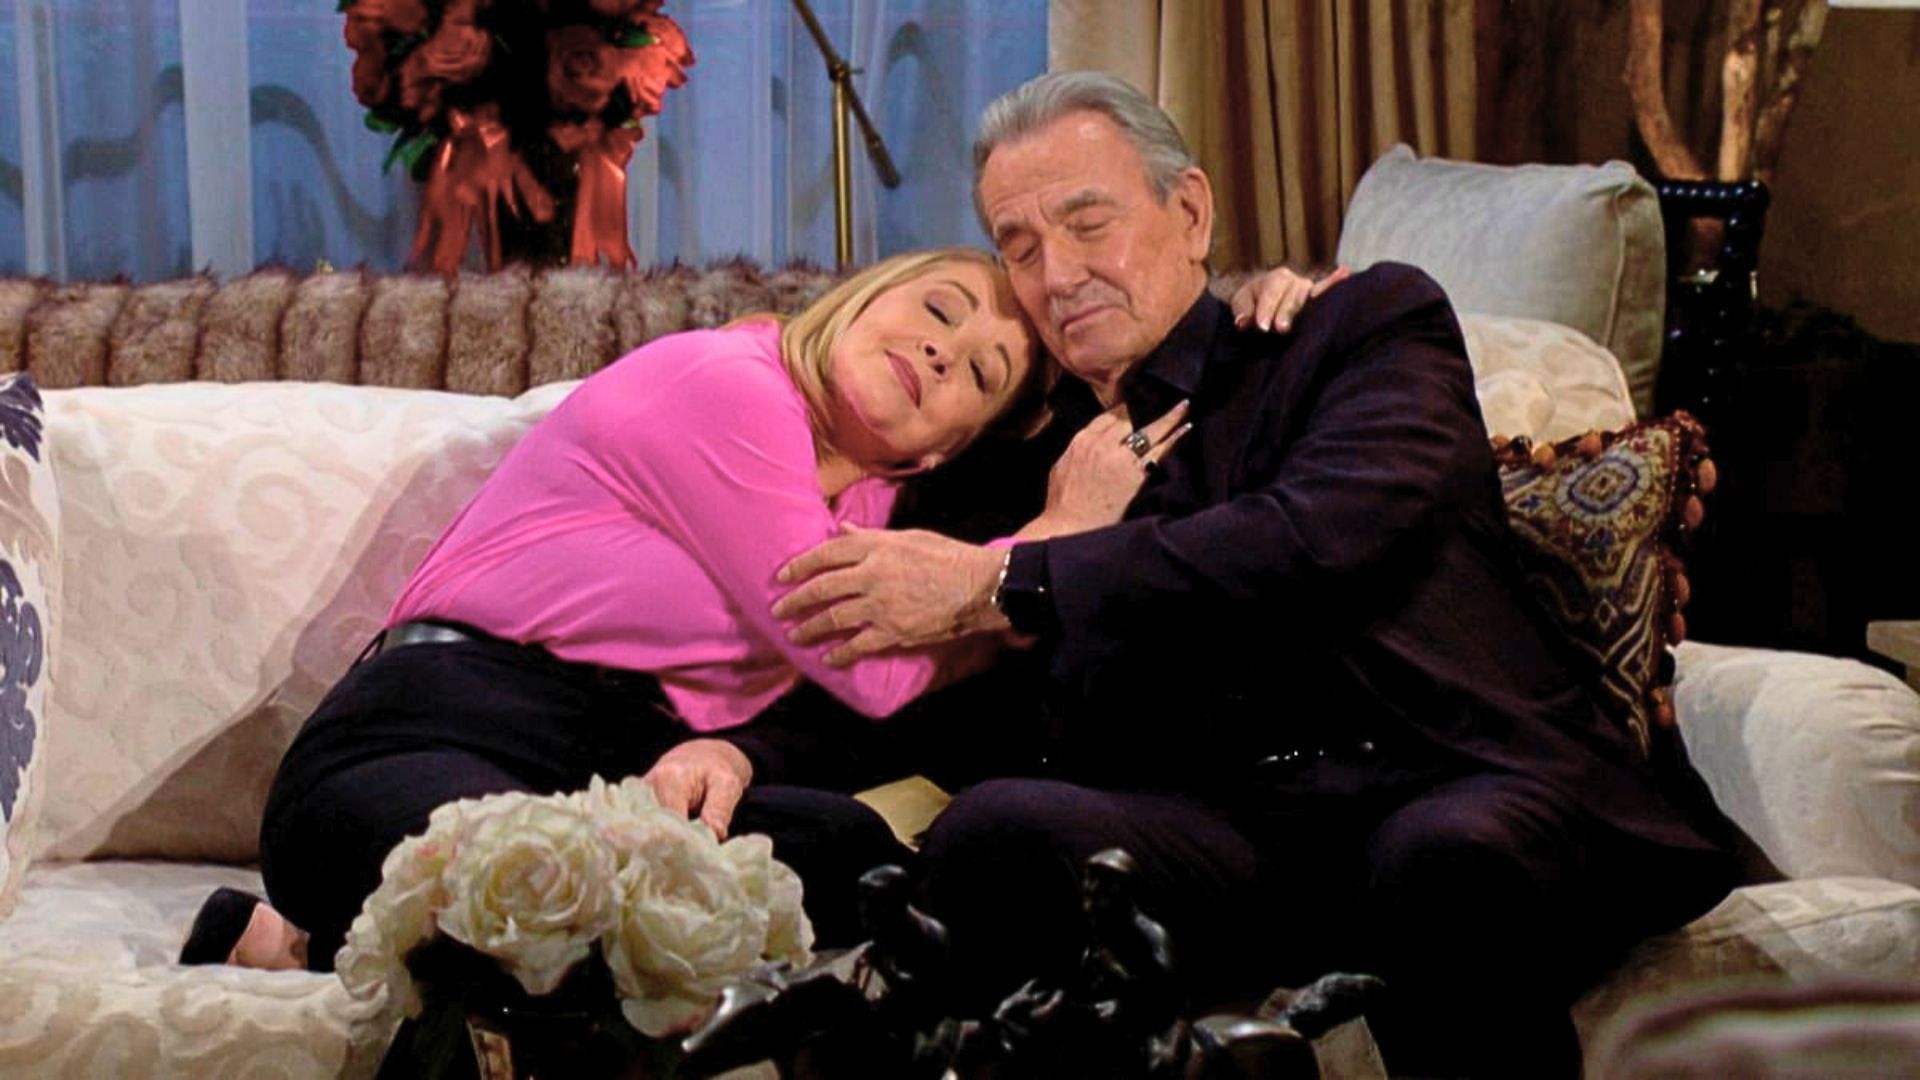 Victor Newman and his wife Nikki are at the heart of the drama this week on The Young and the Restless (Image via CBS)